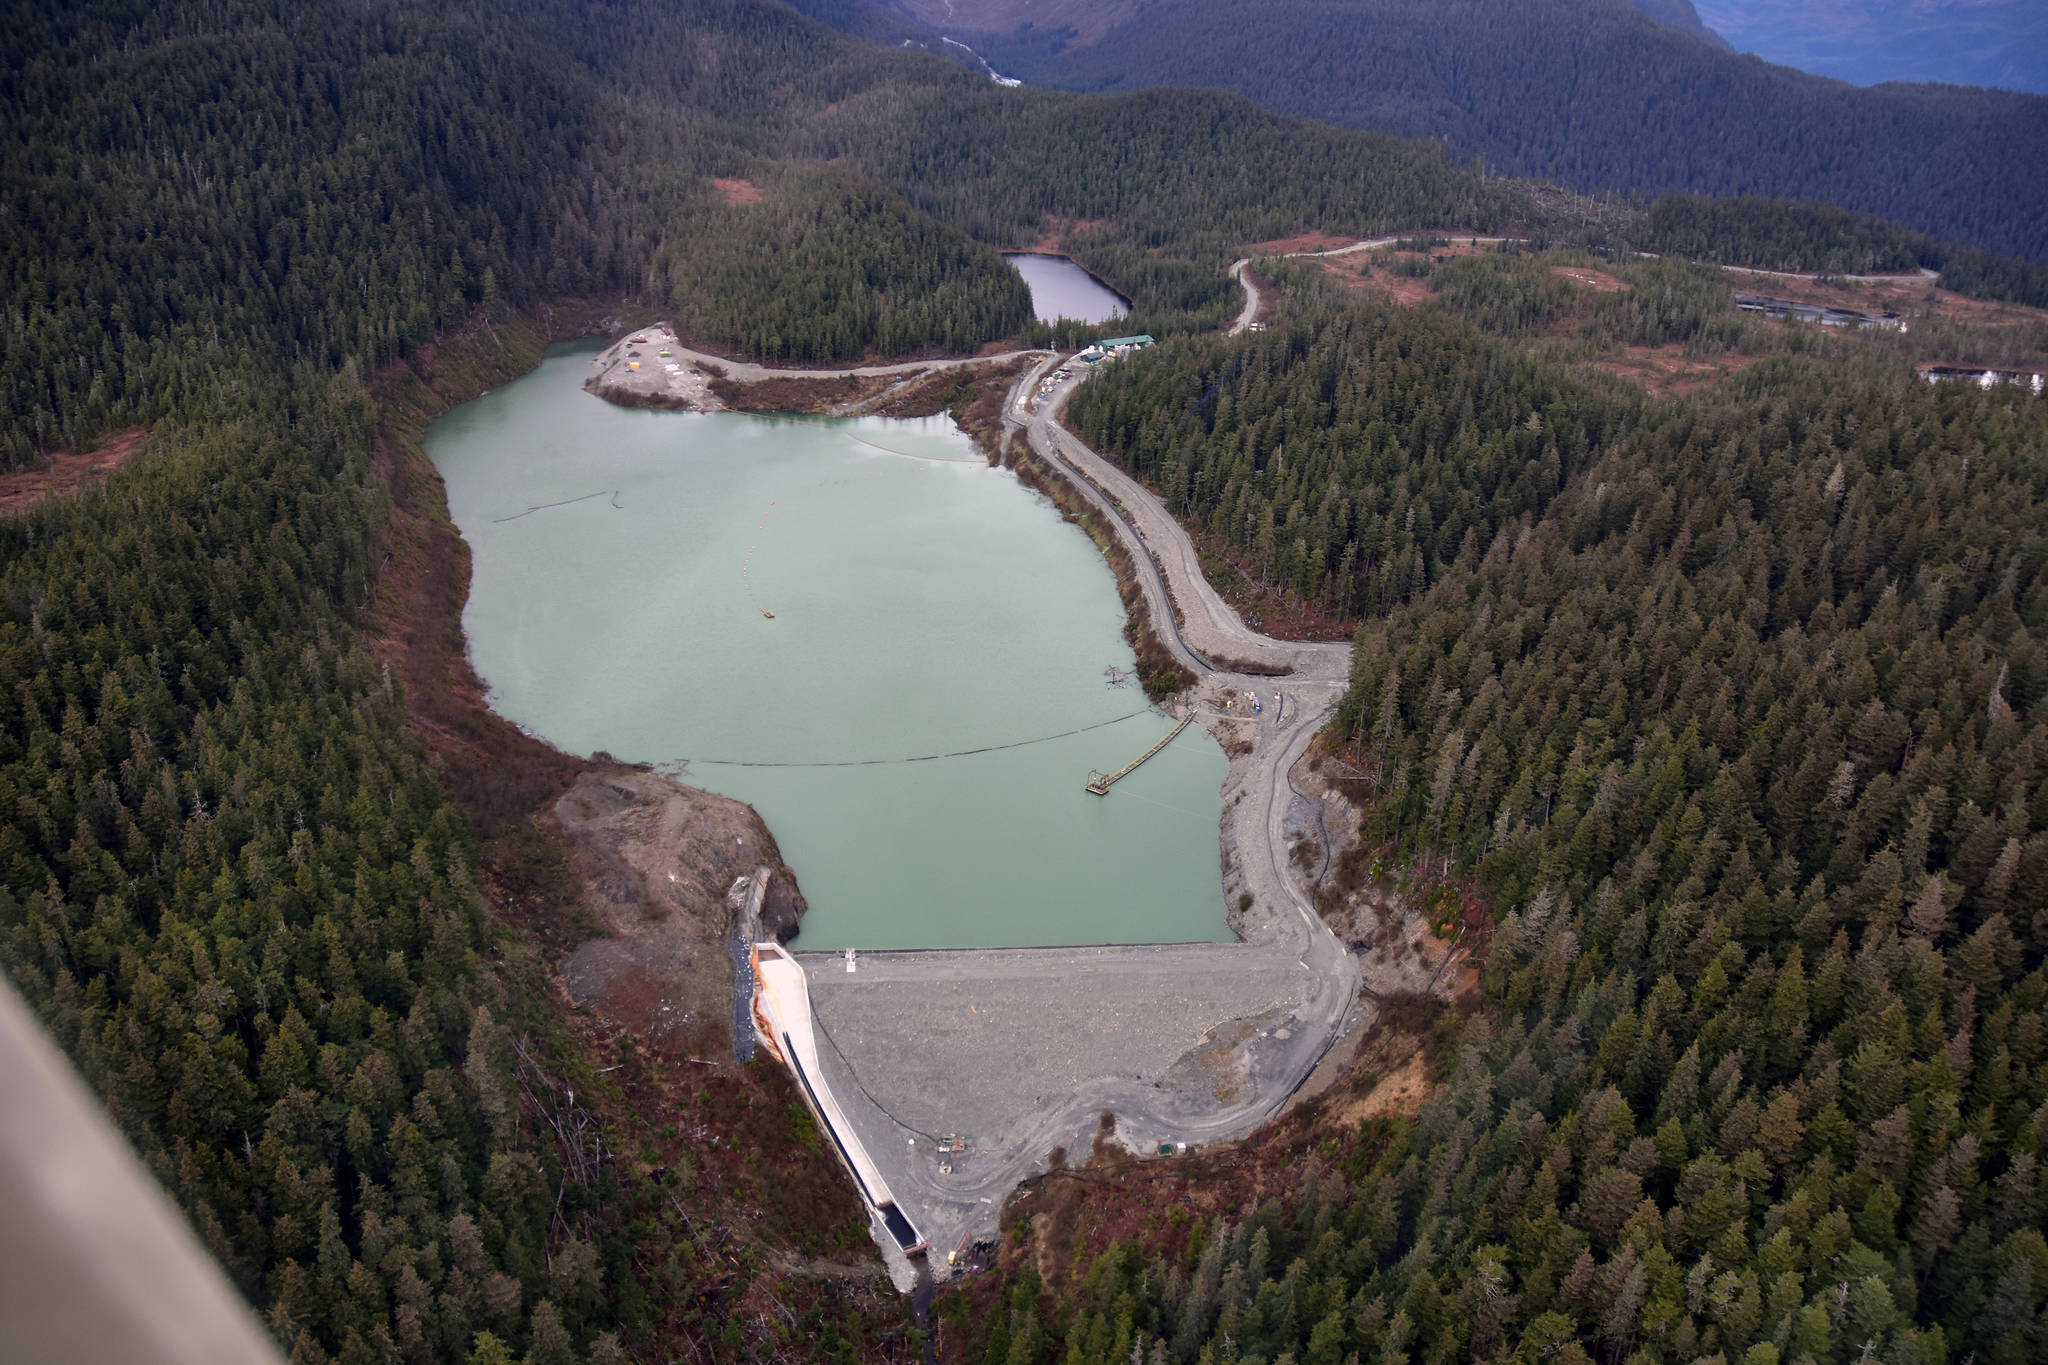 The Tailing Treatment Facility and Upper Slate Lake at the Kensington Mine on Monday, Oct. 14, 2019. (Peter Segall | Juneau Empire)